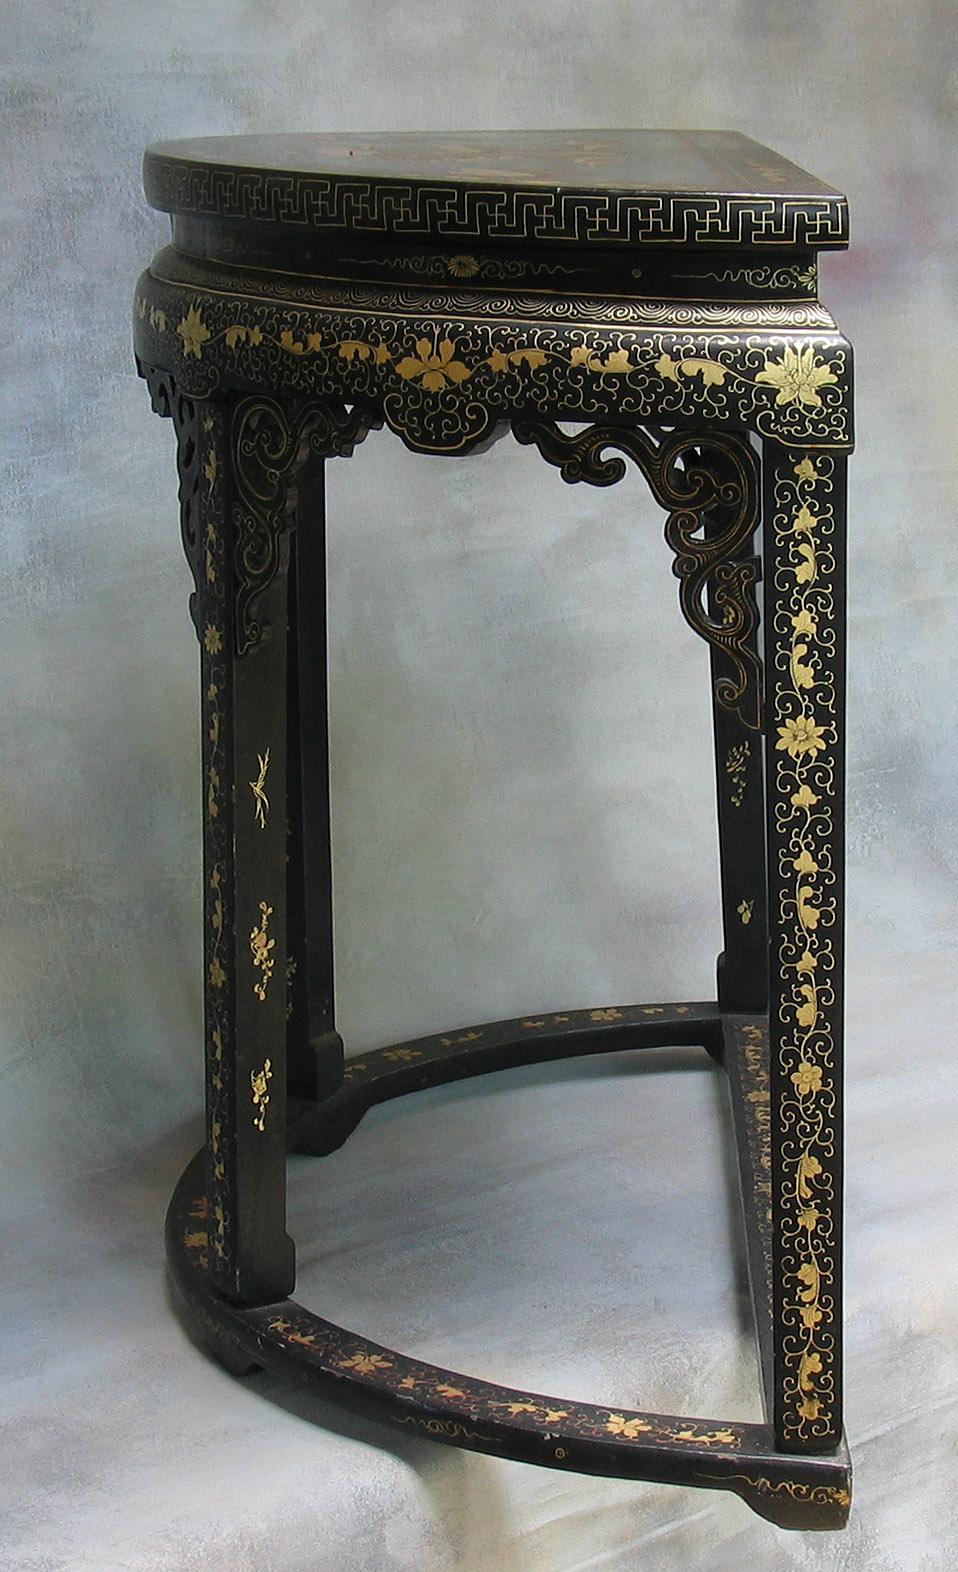 Chinese Export Gilt Lacquer Decorated Demi-lune Console Table Early 19th Century For Sale 4